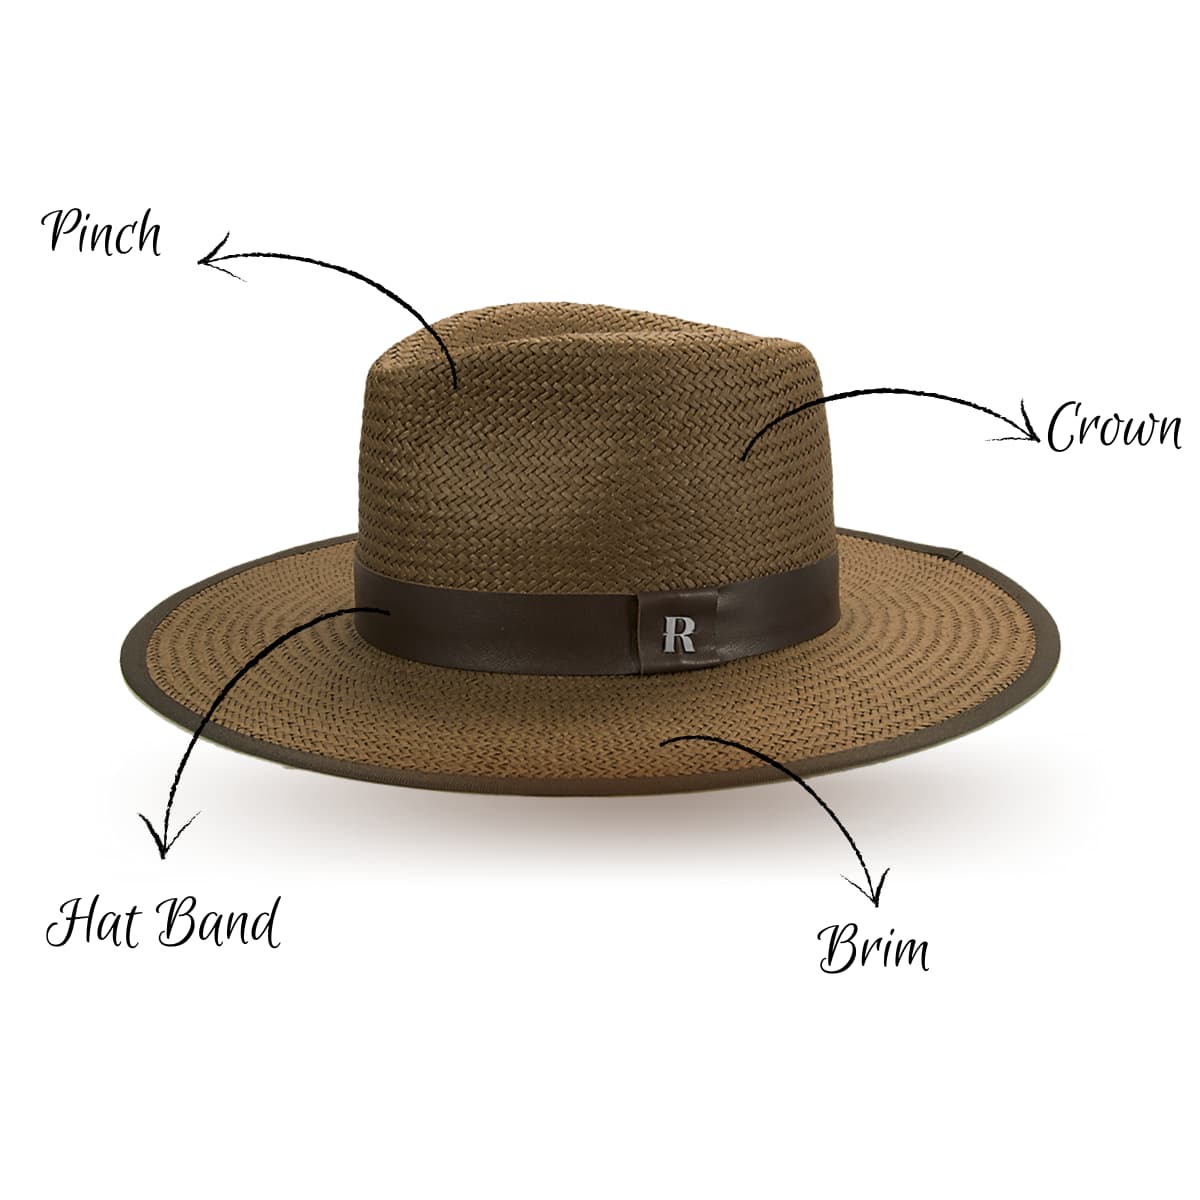 Florida Brown - Straw Hat for Men - Fedora Style